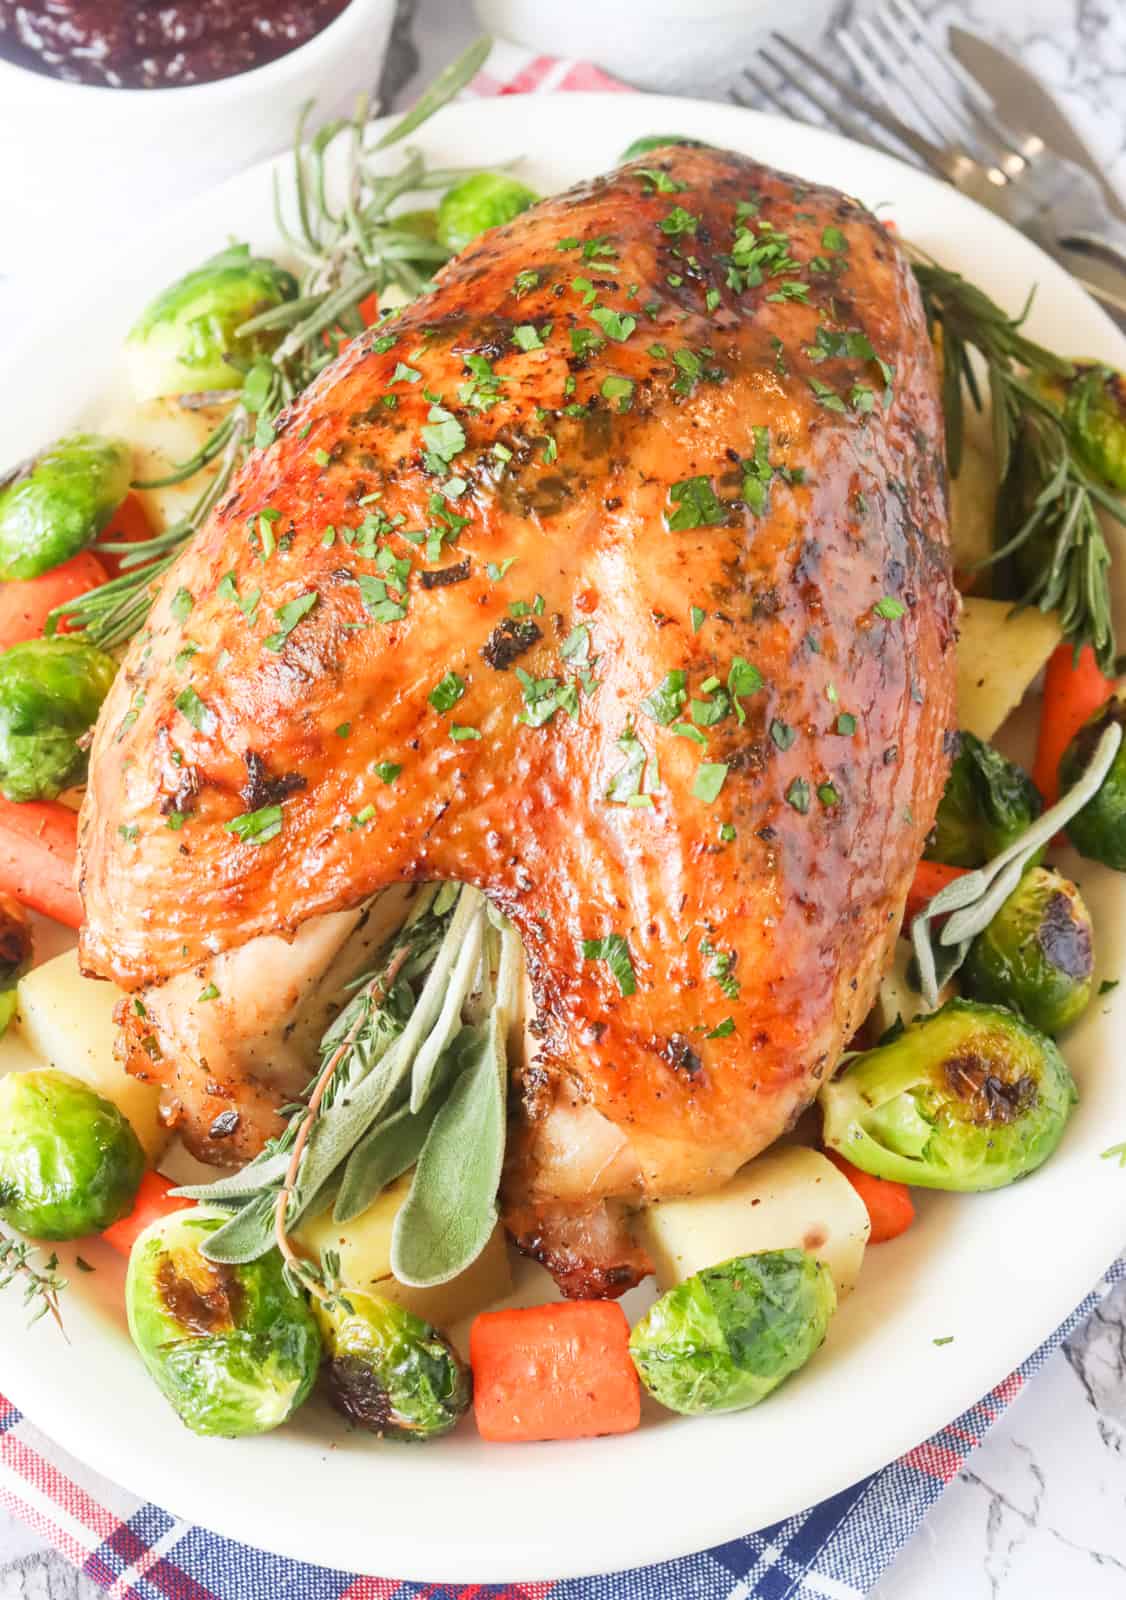 Impress your family with roasted turkey crown with Brussels sprouts and delicious herbs